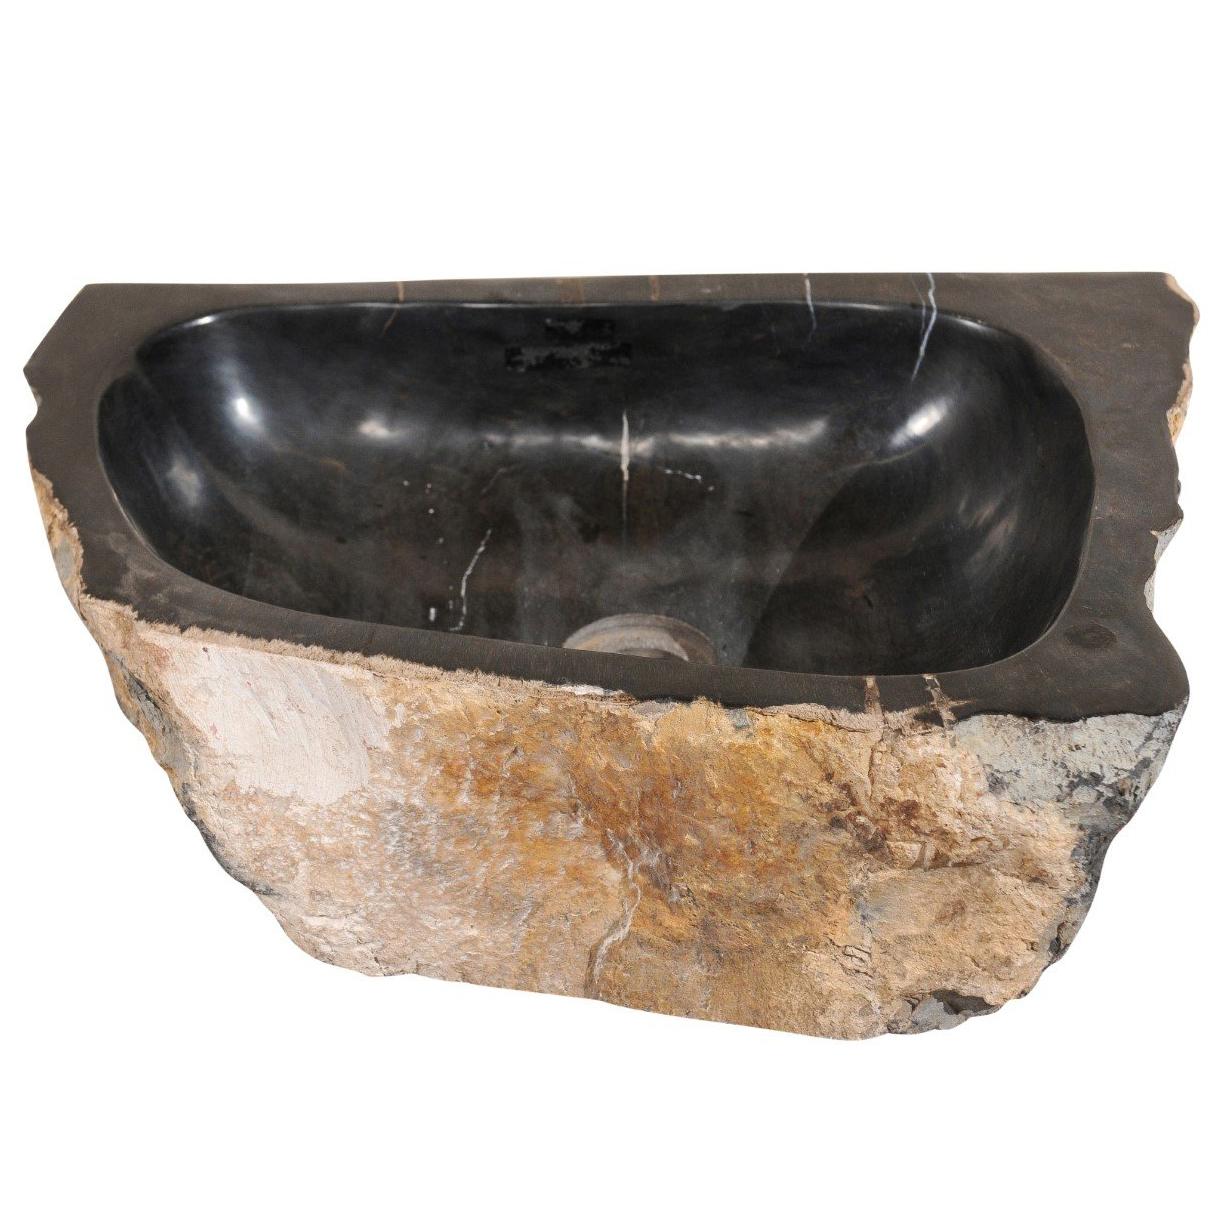 Polished Petrified Wood Sink in Black and Nice Brown Tones